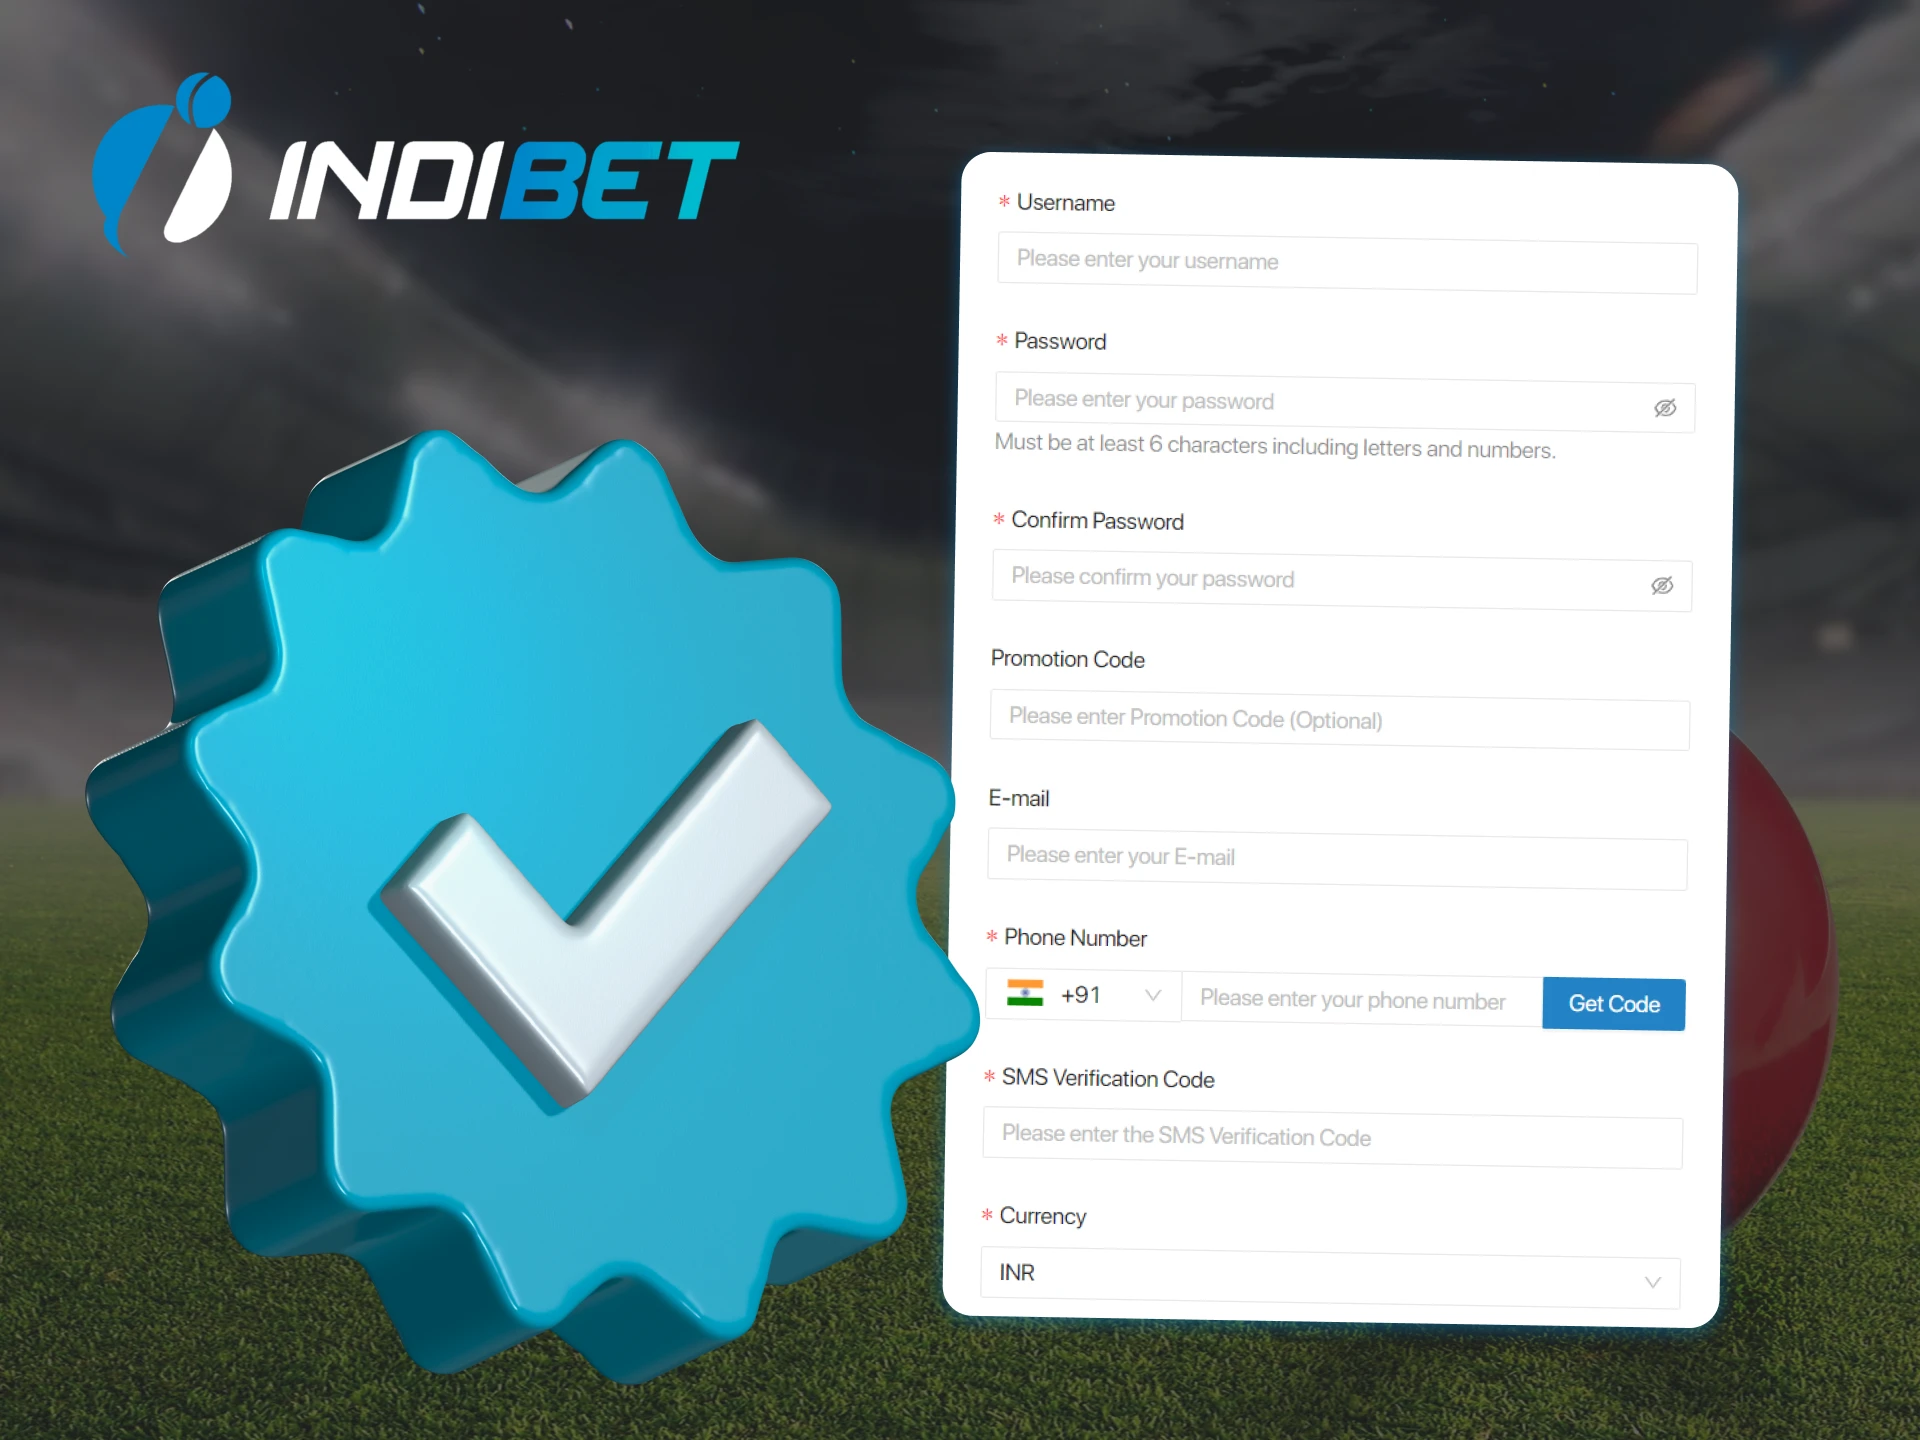 To be able to withdraw funds, you need to verify your Indibet account.